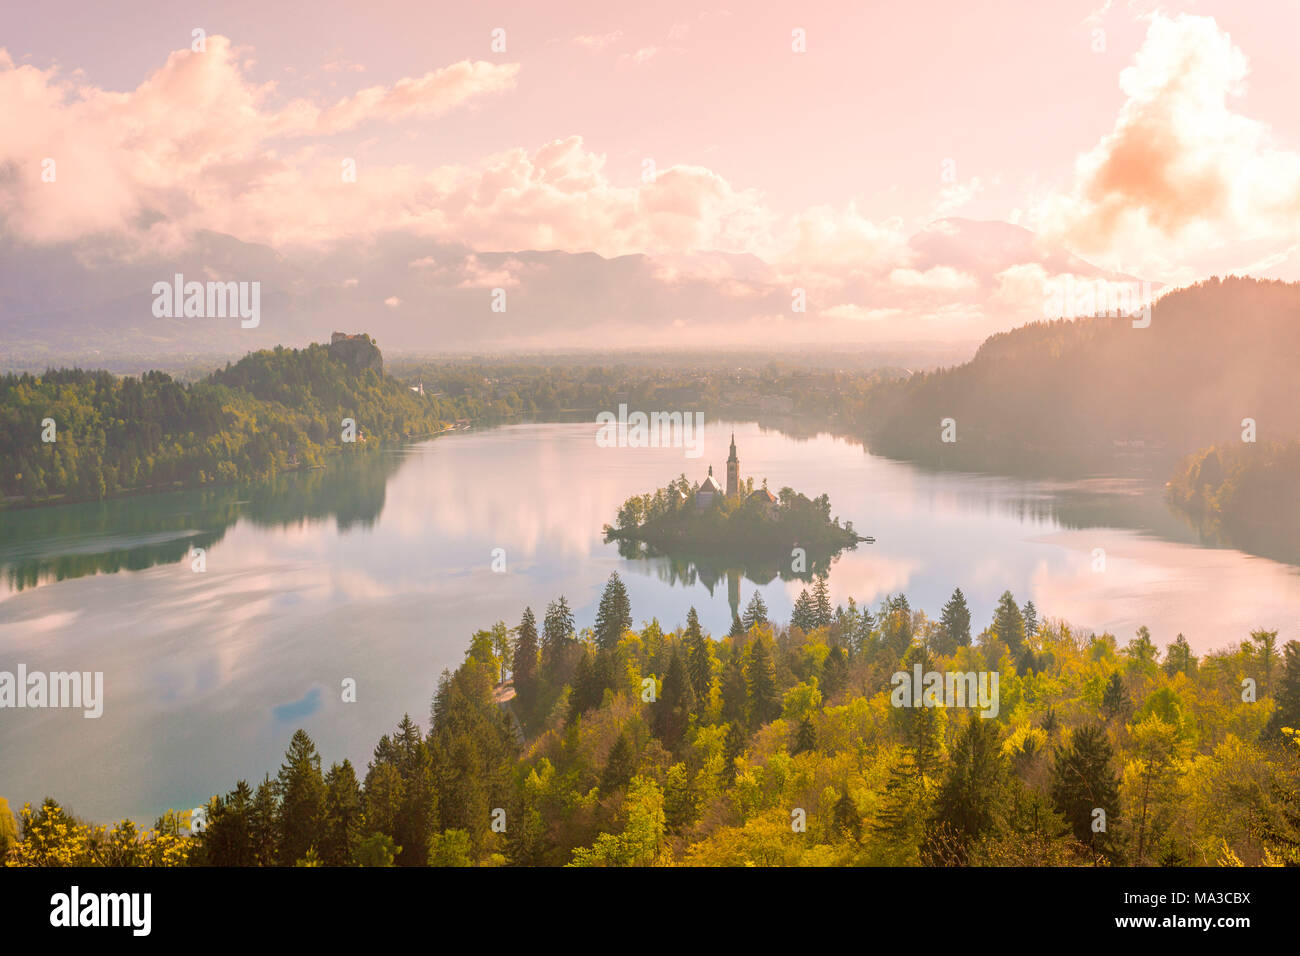 Bled Lake, Slovenia. Sunrise over the misty island from a high point of view Stock Photo